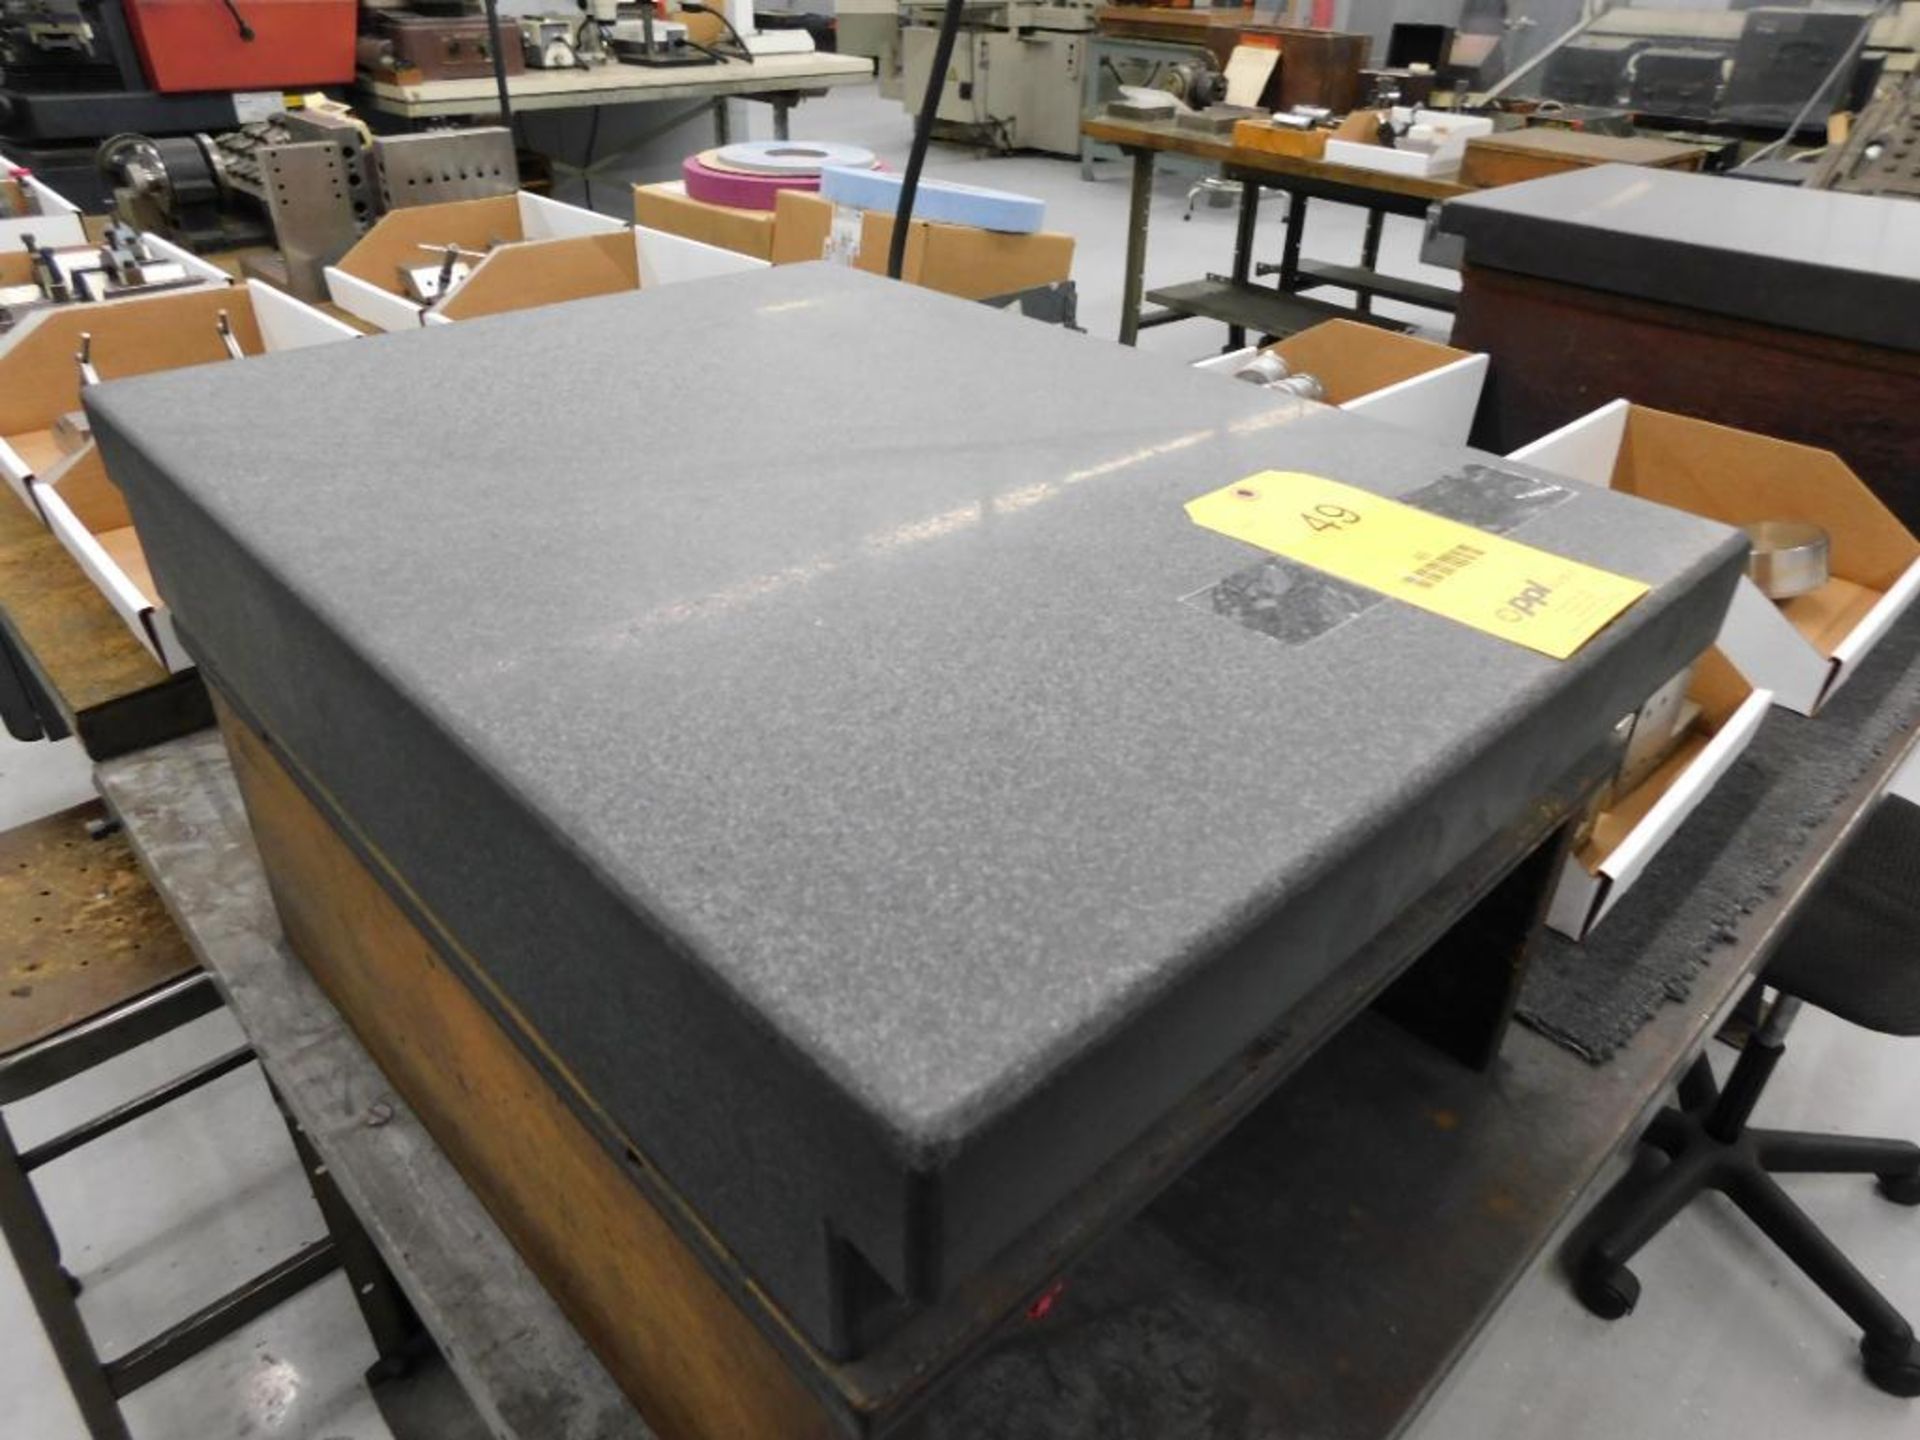 LOT: DoAll 24 in. x 18 in. x 4 in. Surface Plate, 24 in. x 18 in. x 2-3/4 in. Surface Plate